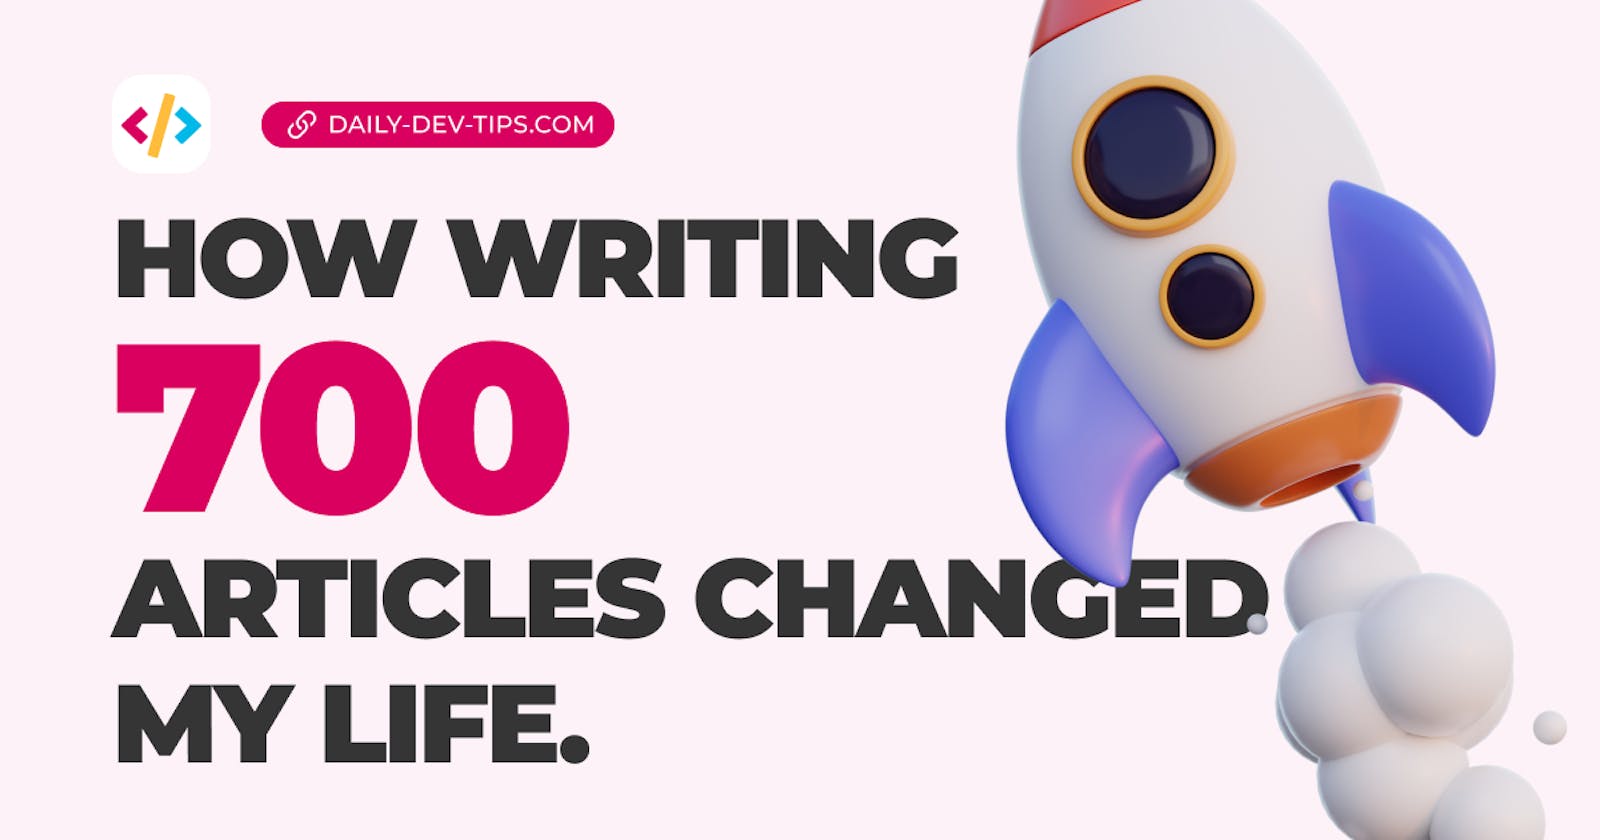 How writing 700 articles changed my life